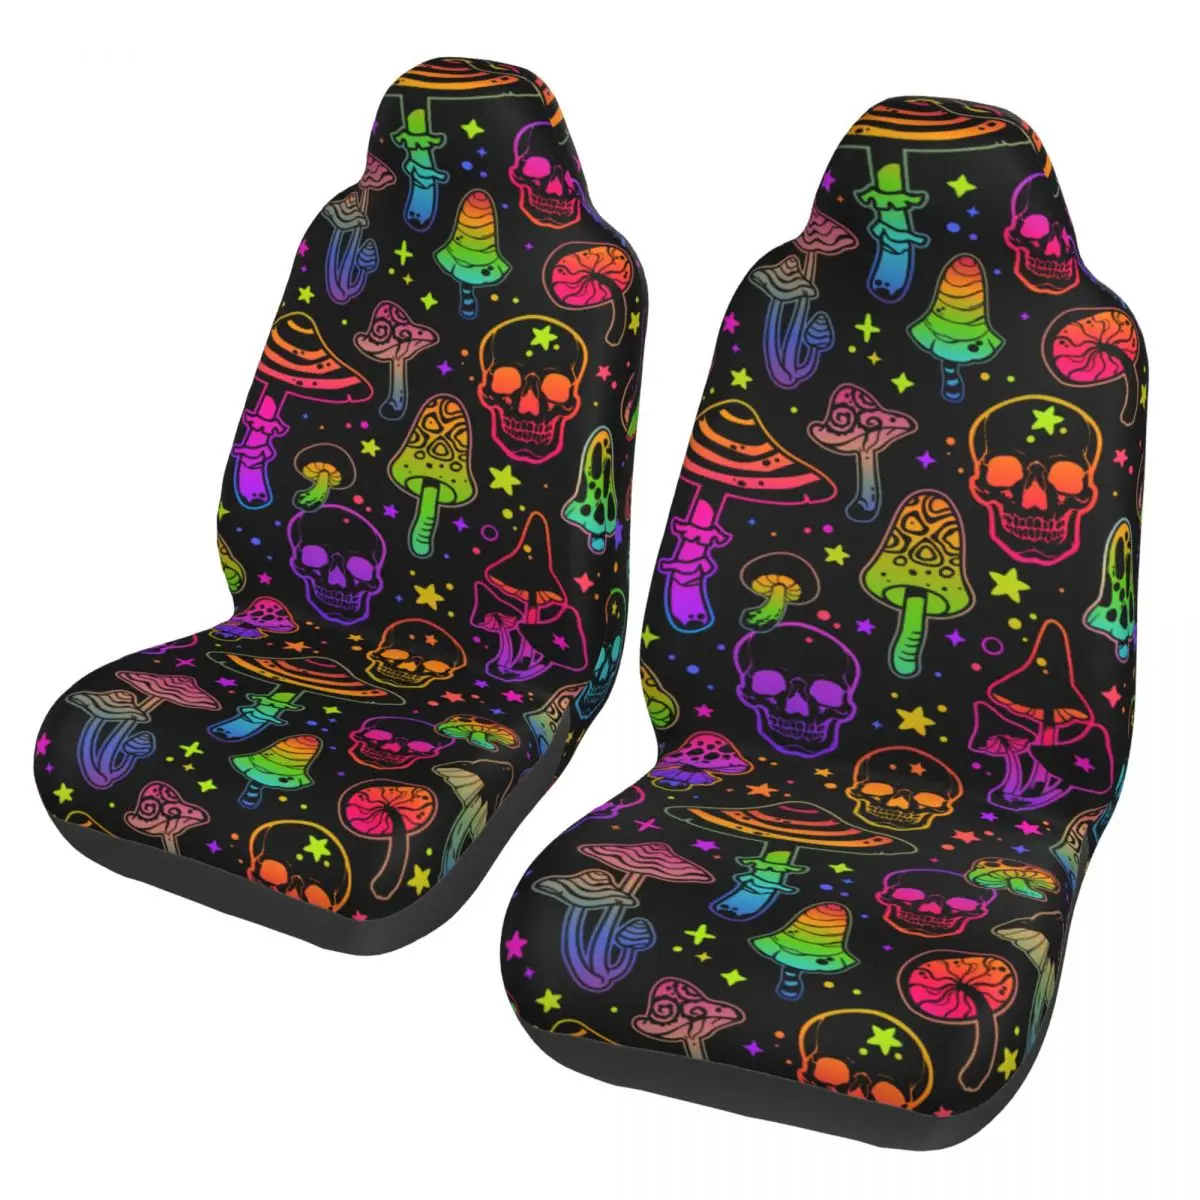 

Bright Poisonous Mushrooms Skulls Universal Car Seat Cover for most cars For All Psychedelic Seat Covers Polyester Fishing